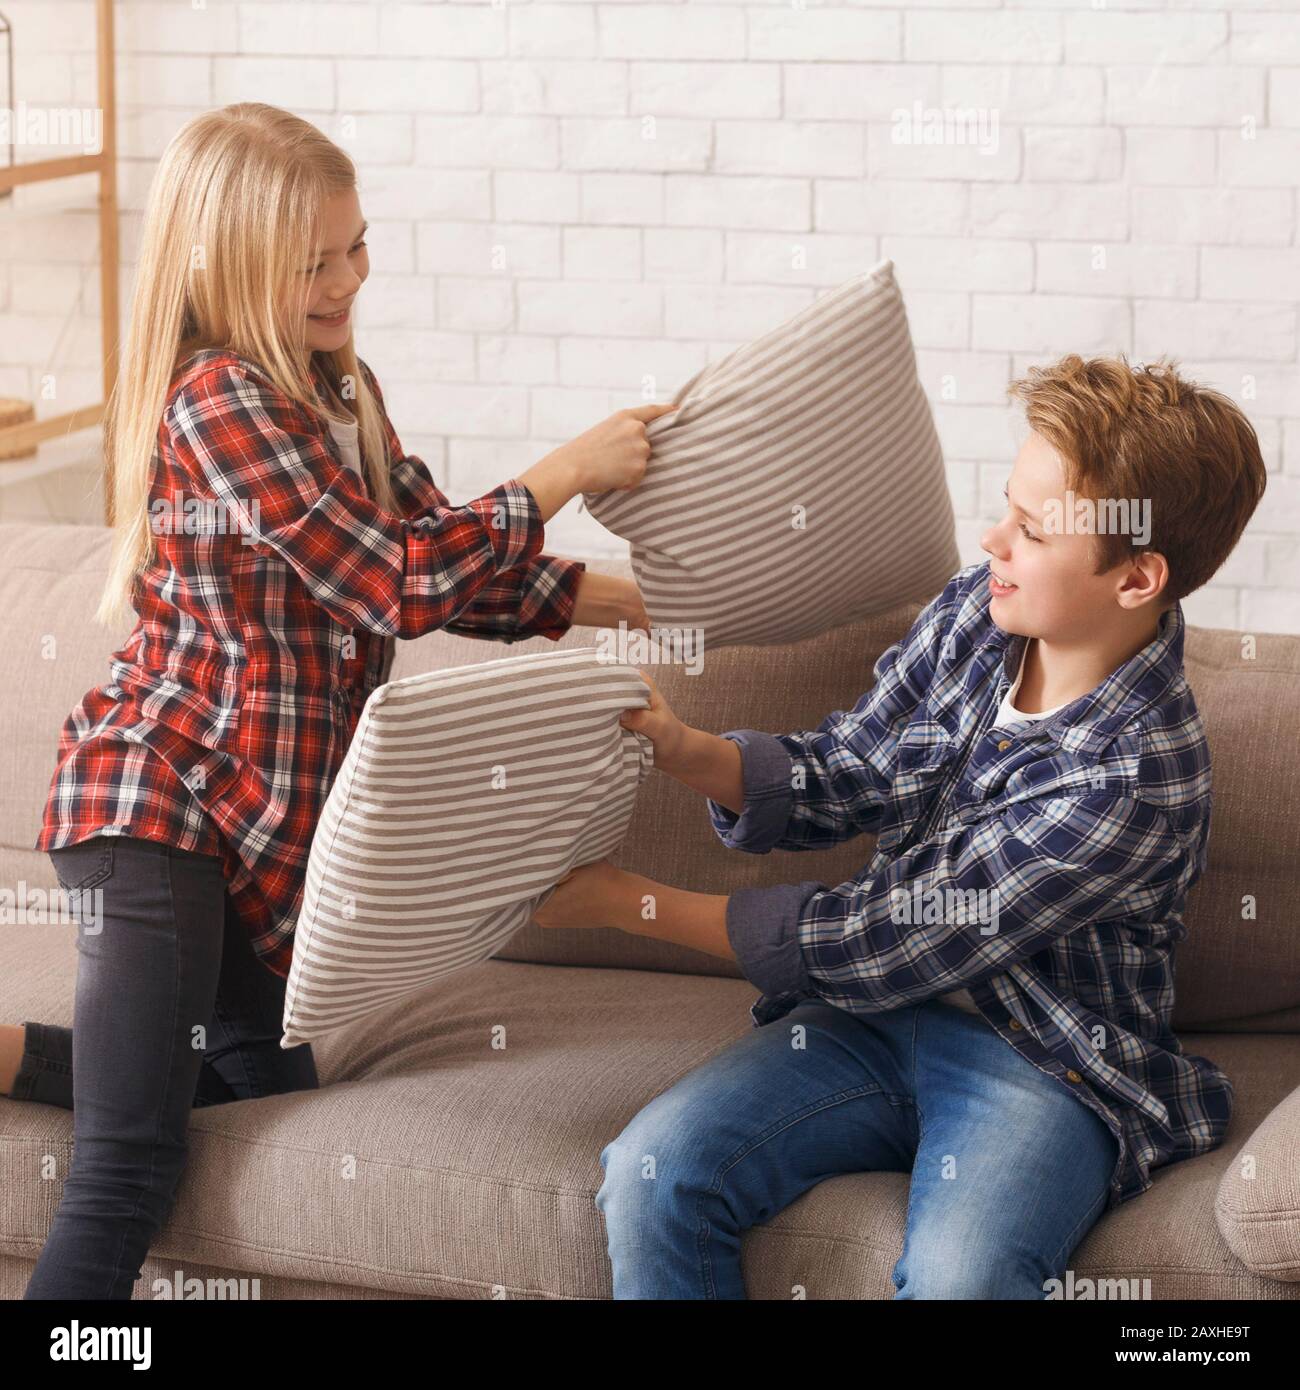 Two Kids Having Pillow Fight Playing On Couch Indoor Stock Photo